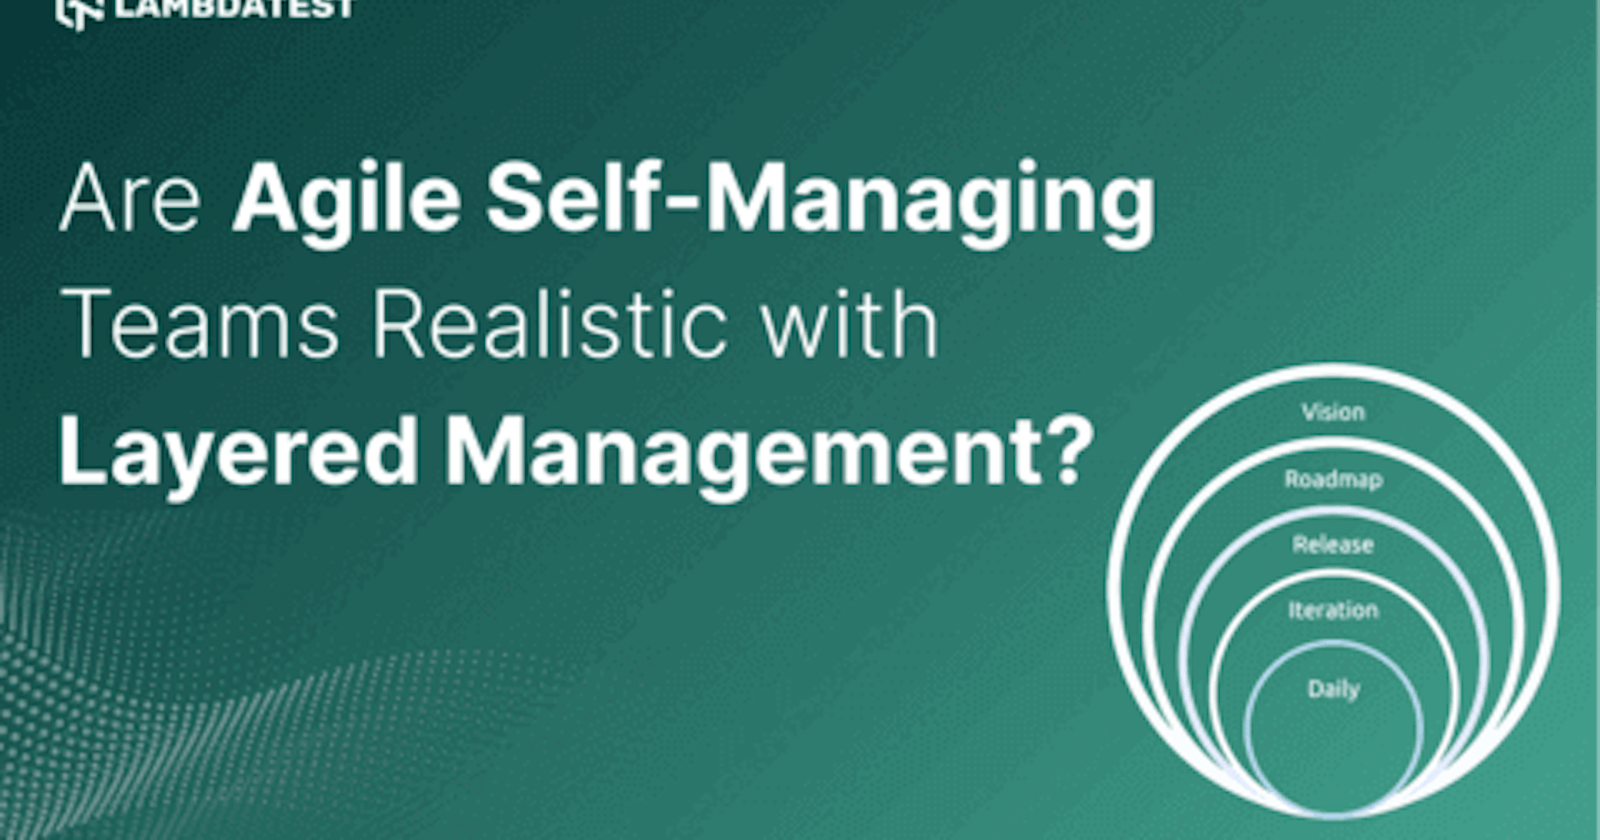 Are Agile Self-Managing Teams Realistic with Layered Management?